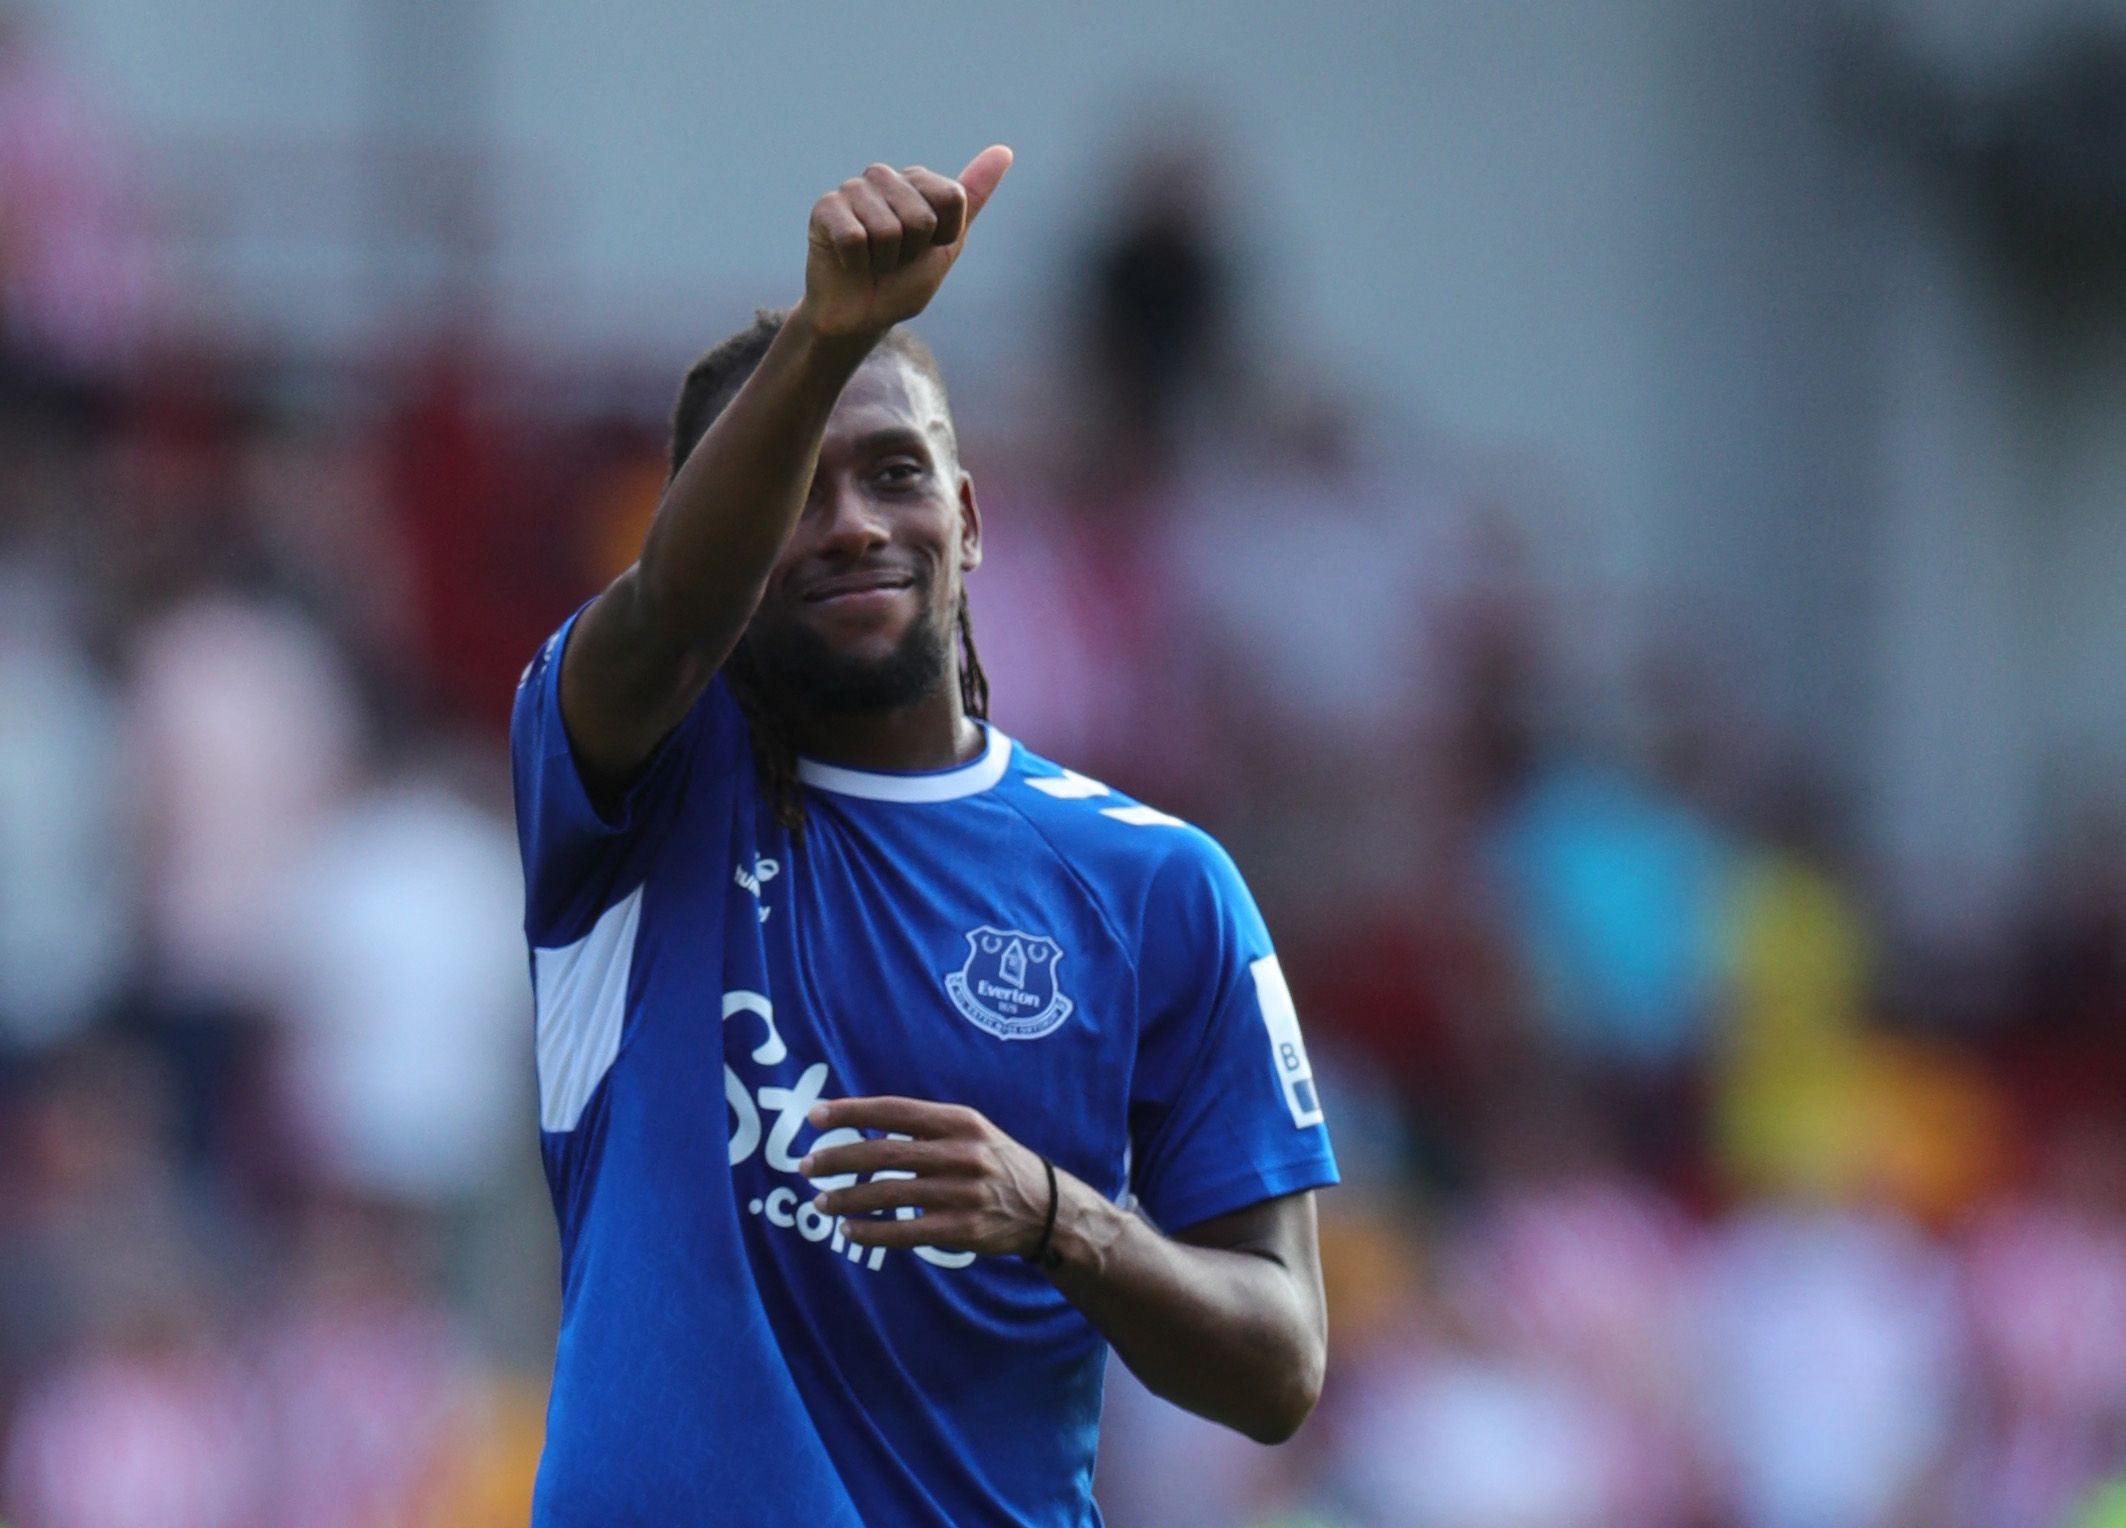 Everton: Toffees ‘starting to work on’ new Alex Iwobi contract -Everton News